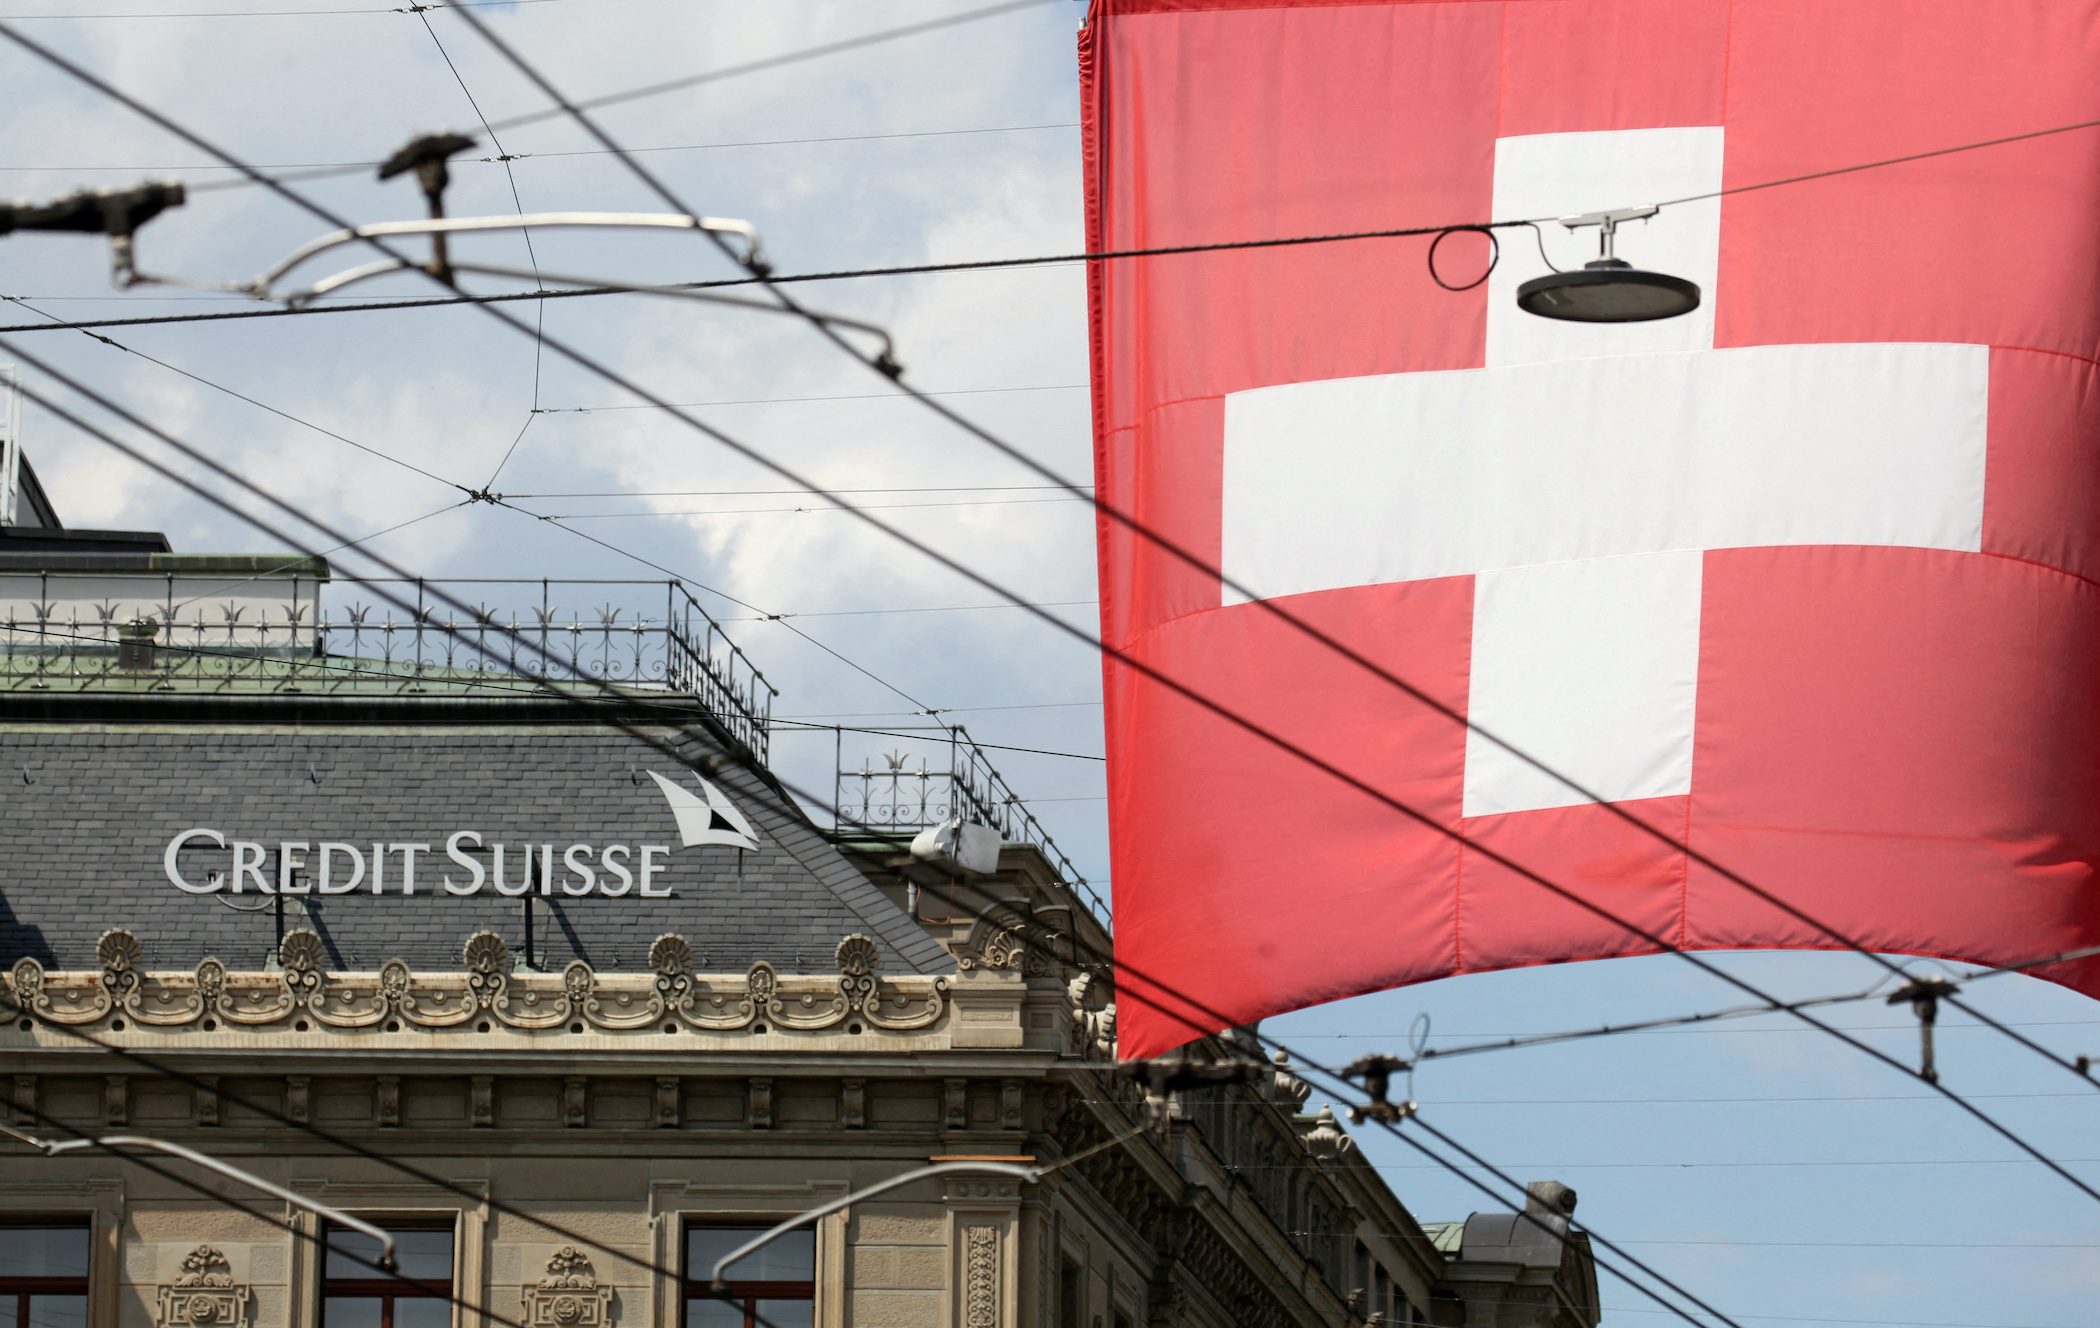 Credit Suisse looking at cutting around 5,000 jobs in cost drive – source